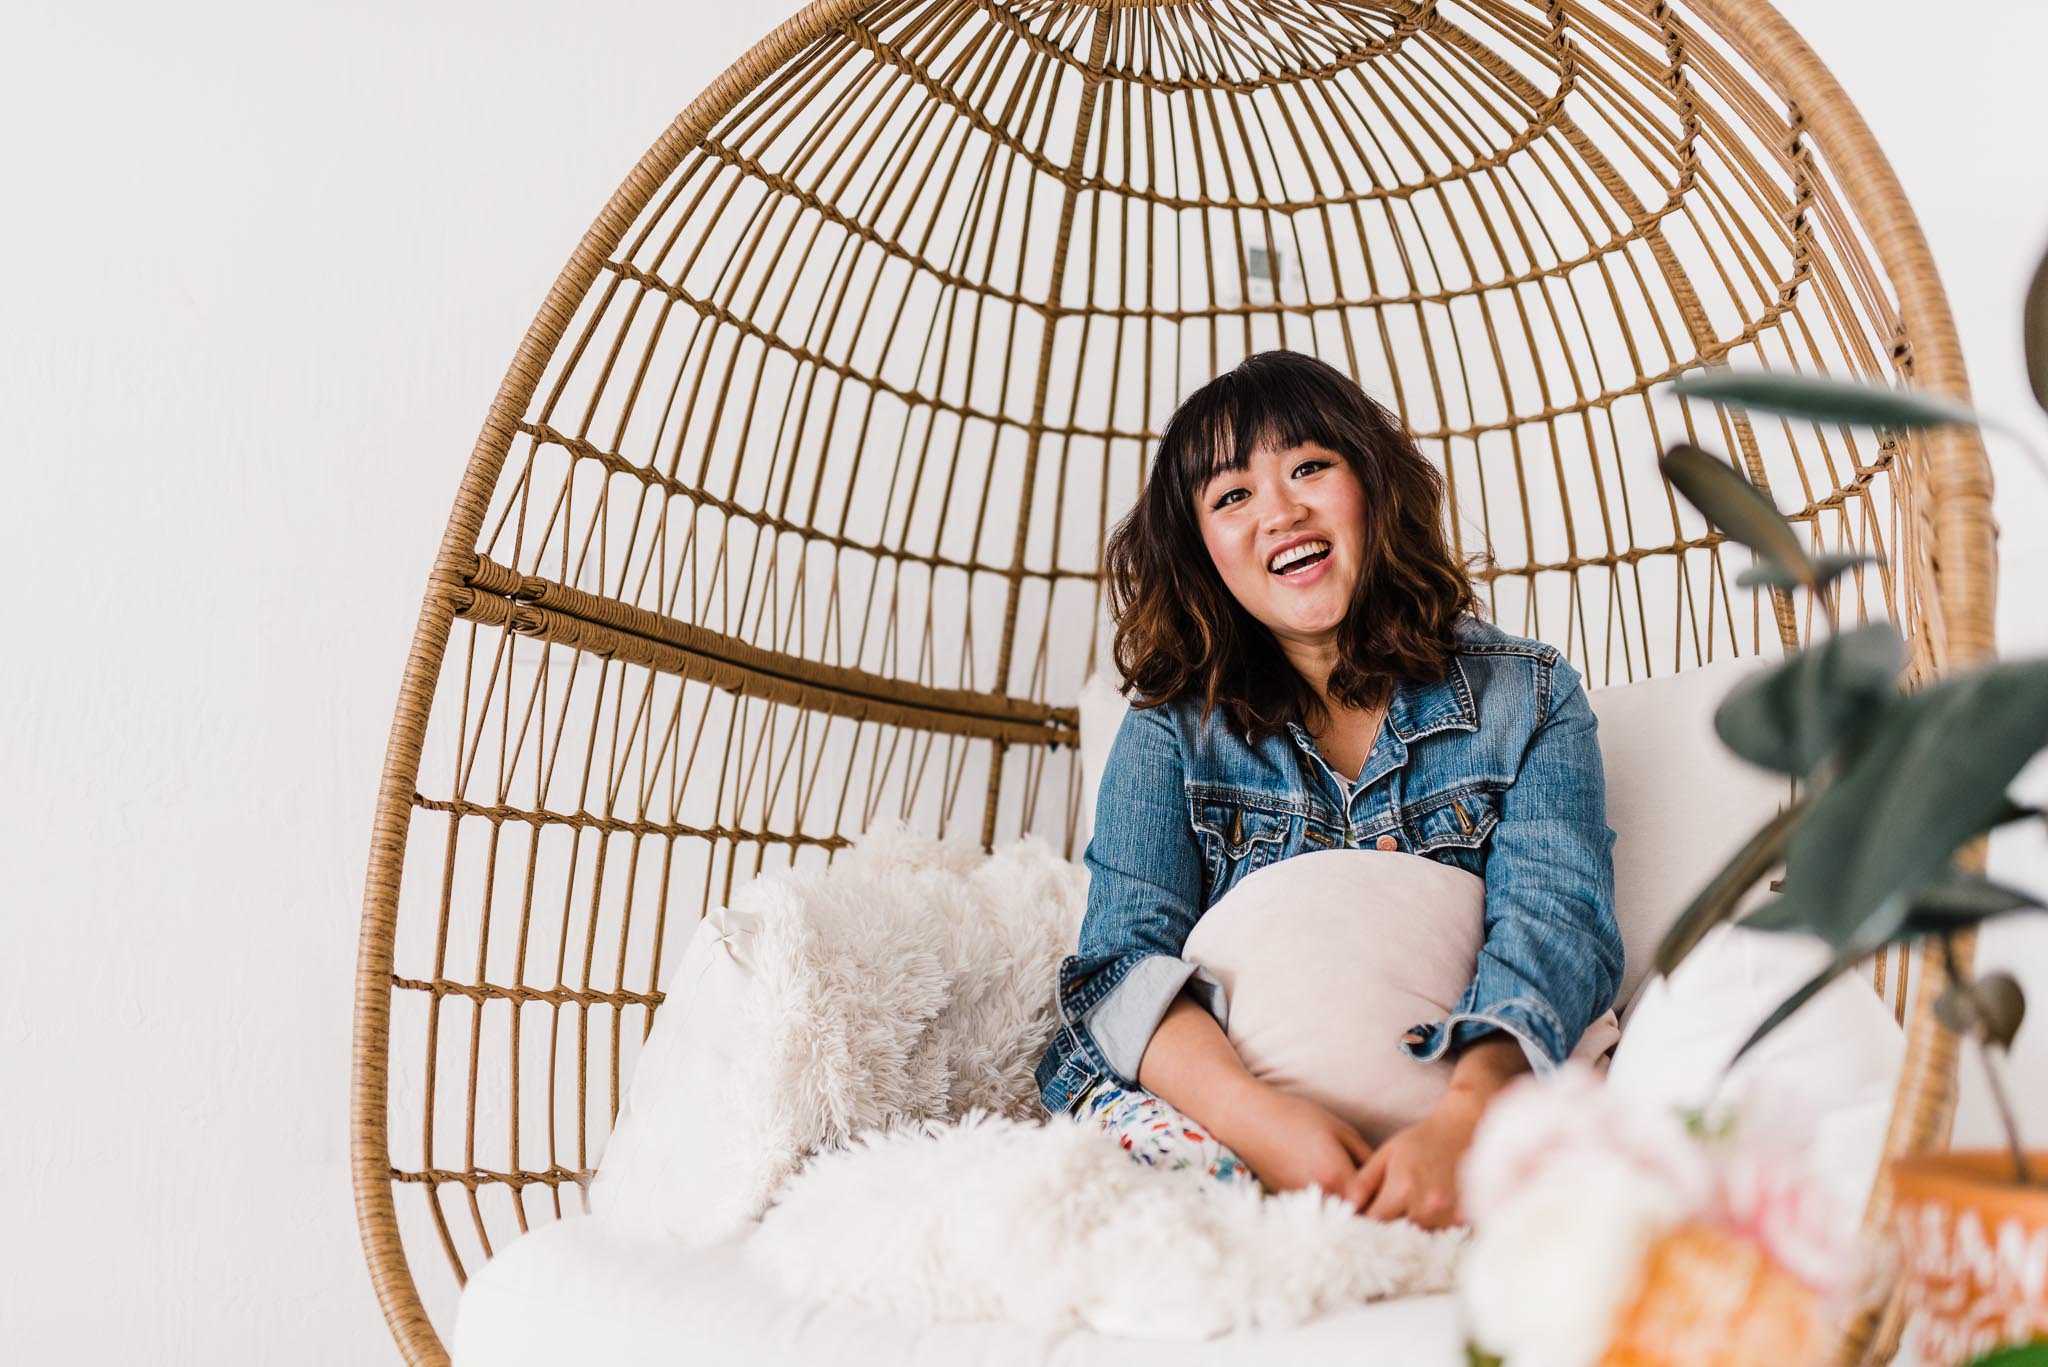 Smiling woman sitting in comfy boho chair with pillows.